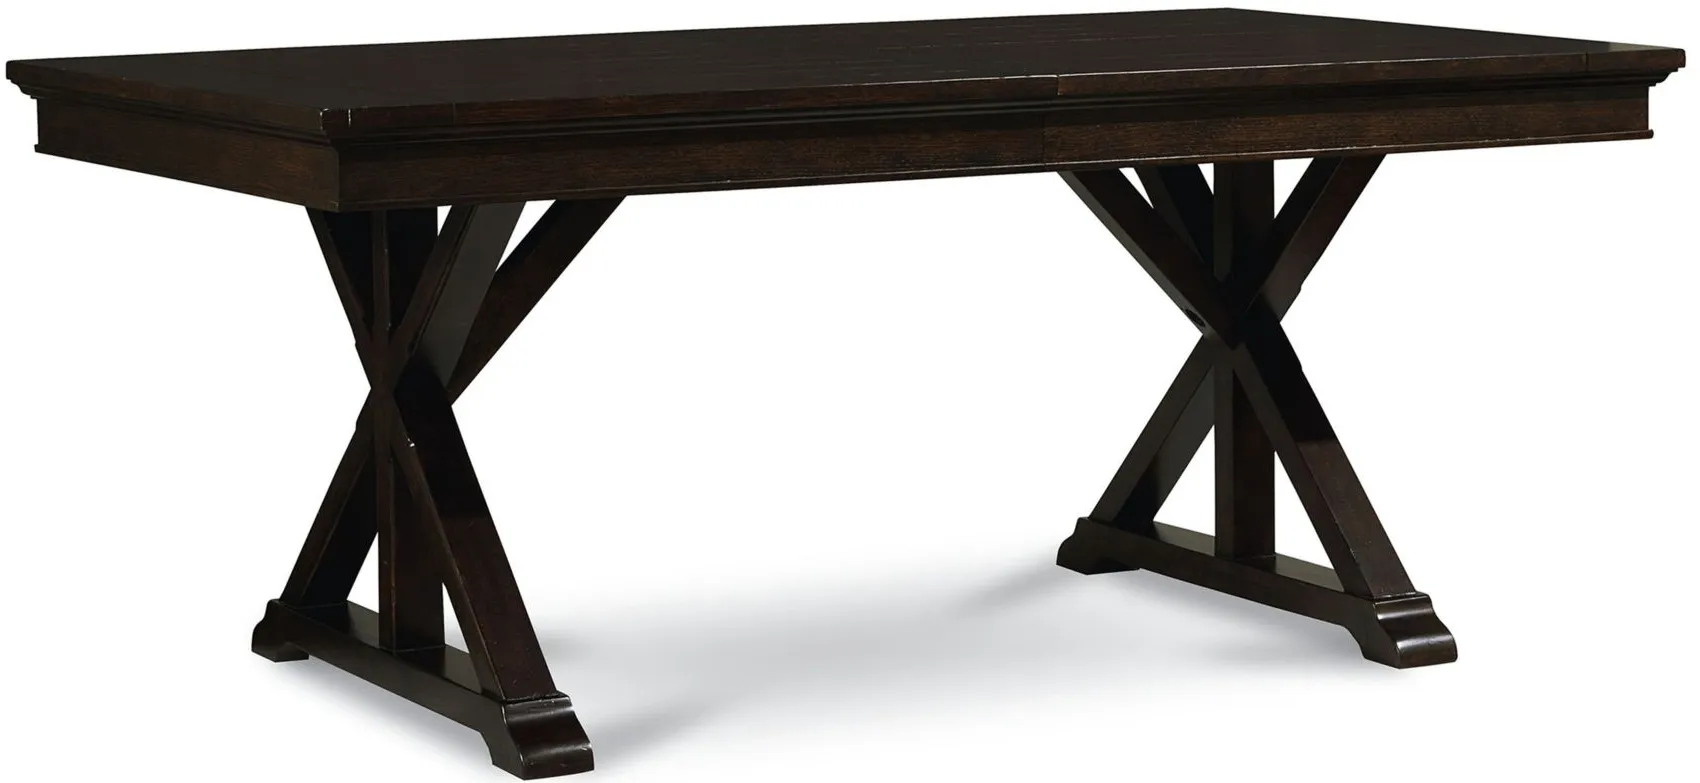 Thatcher Trestle Table in Amber by Legacy Classic Furniture